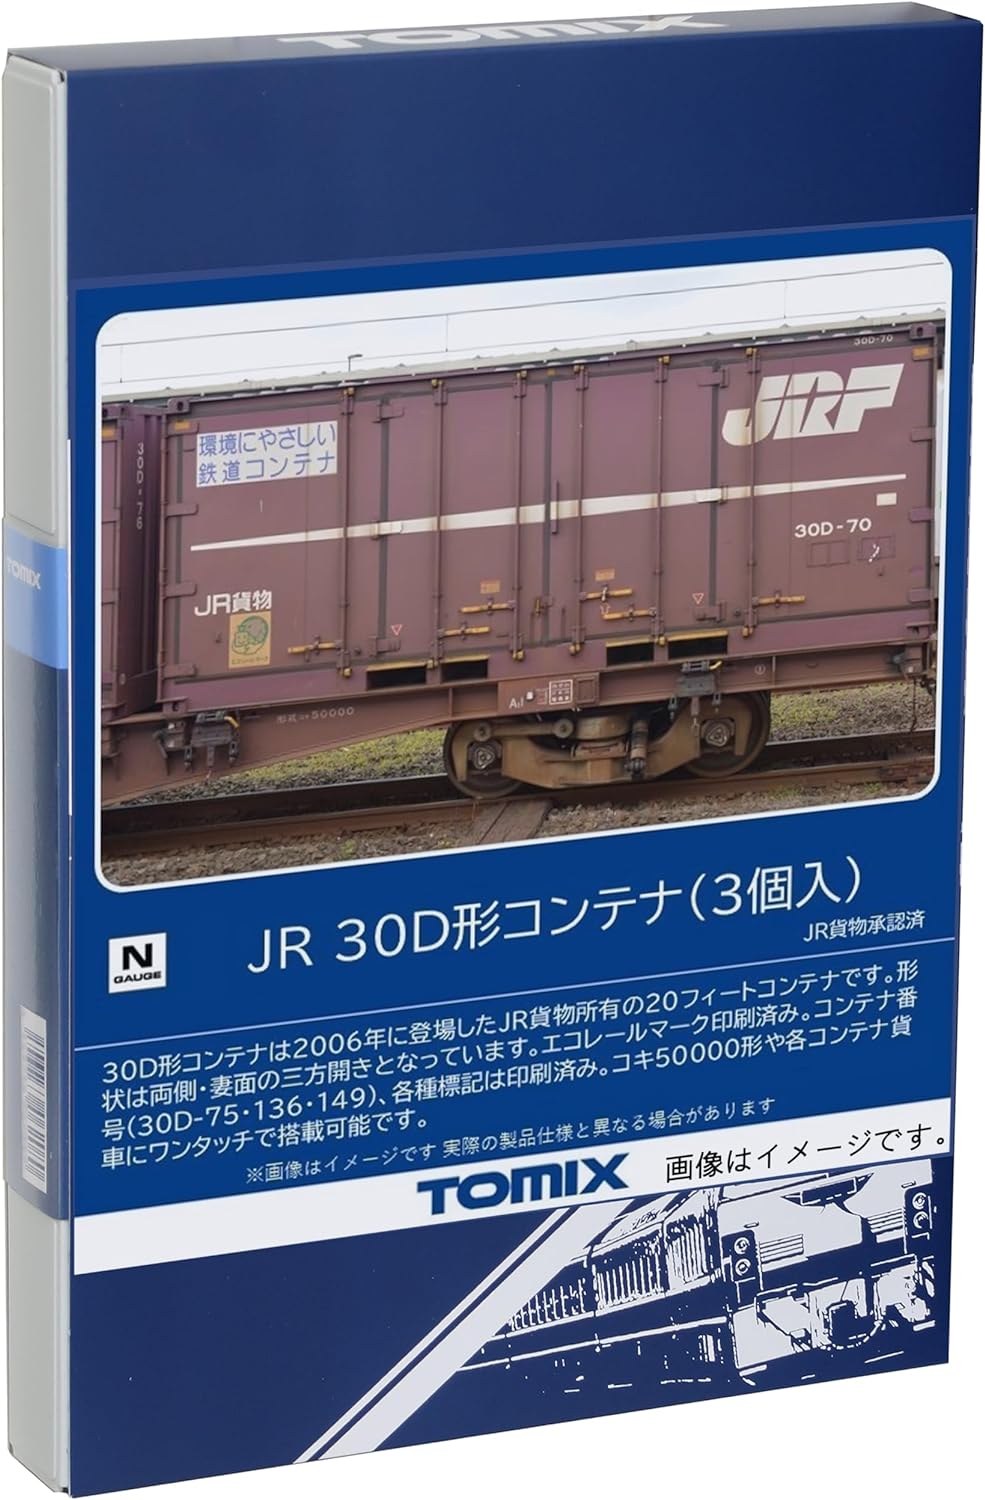 [PO MARCH 2024] TOMIX 3305 N Gauge JR 30D Shaped Container, 3 Pieces - BanzaiHobby